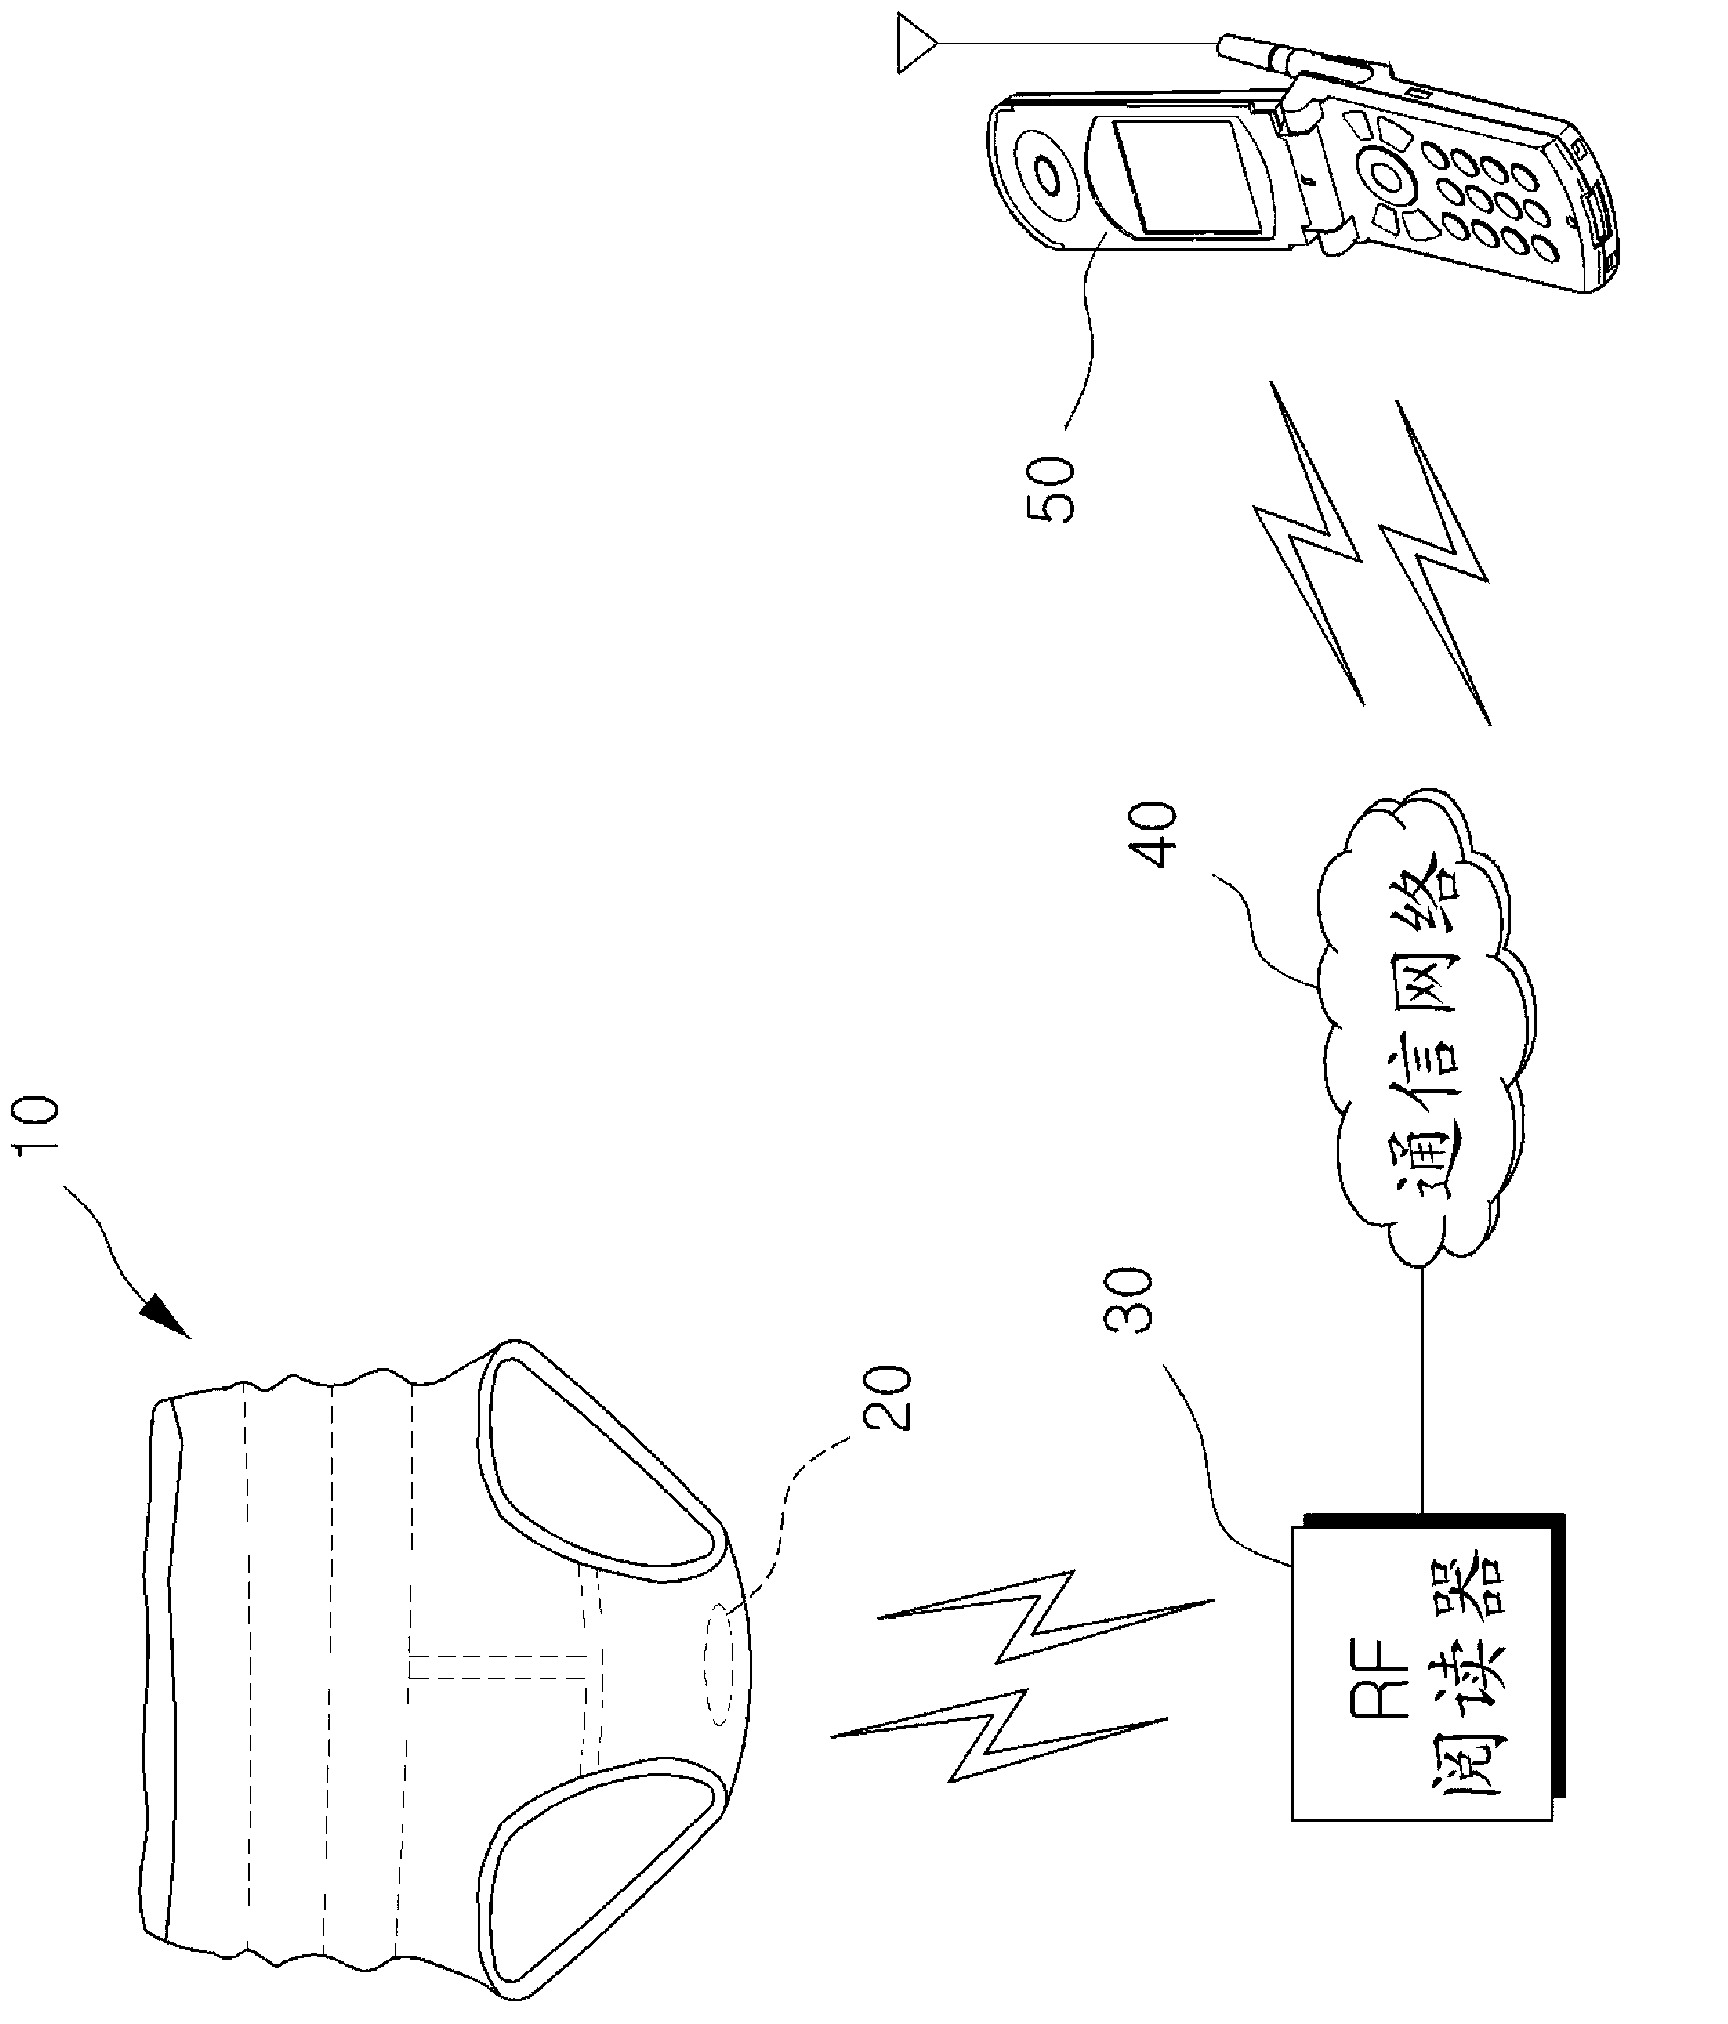 Defecation/urination detection system and method